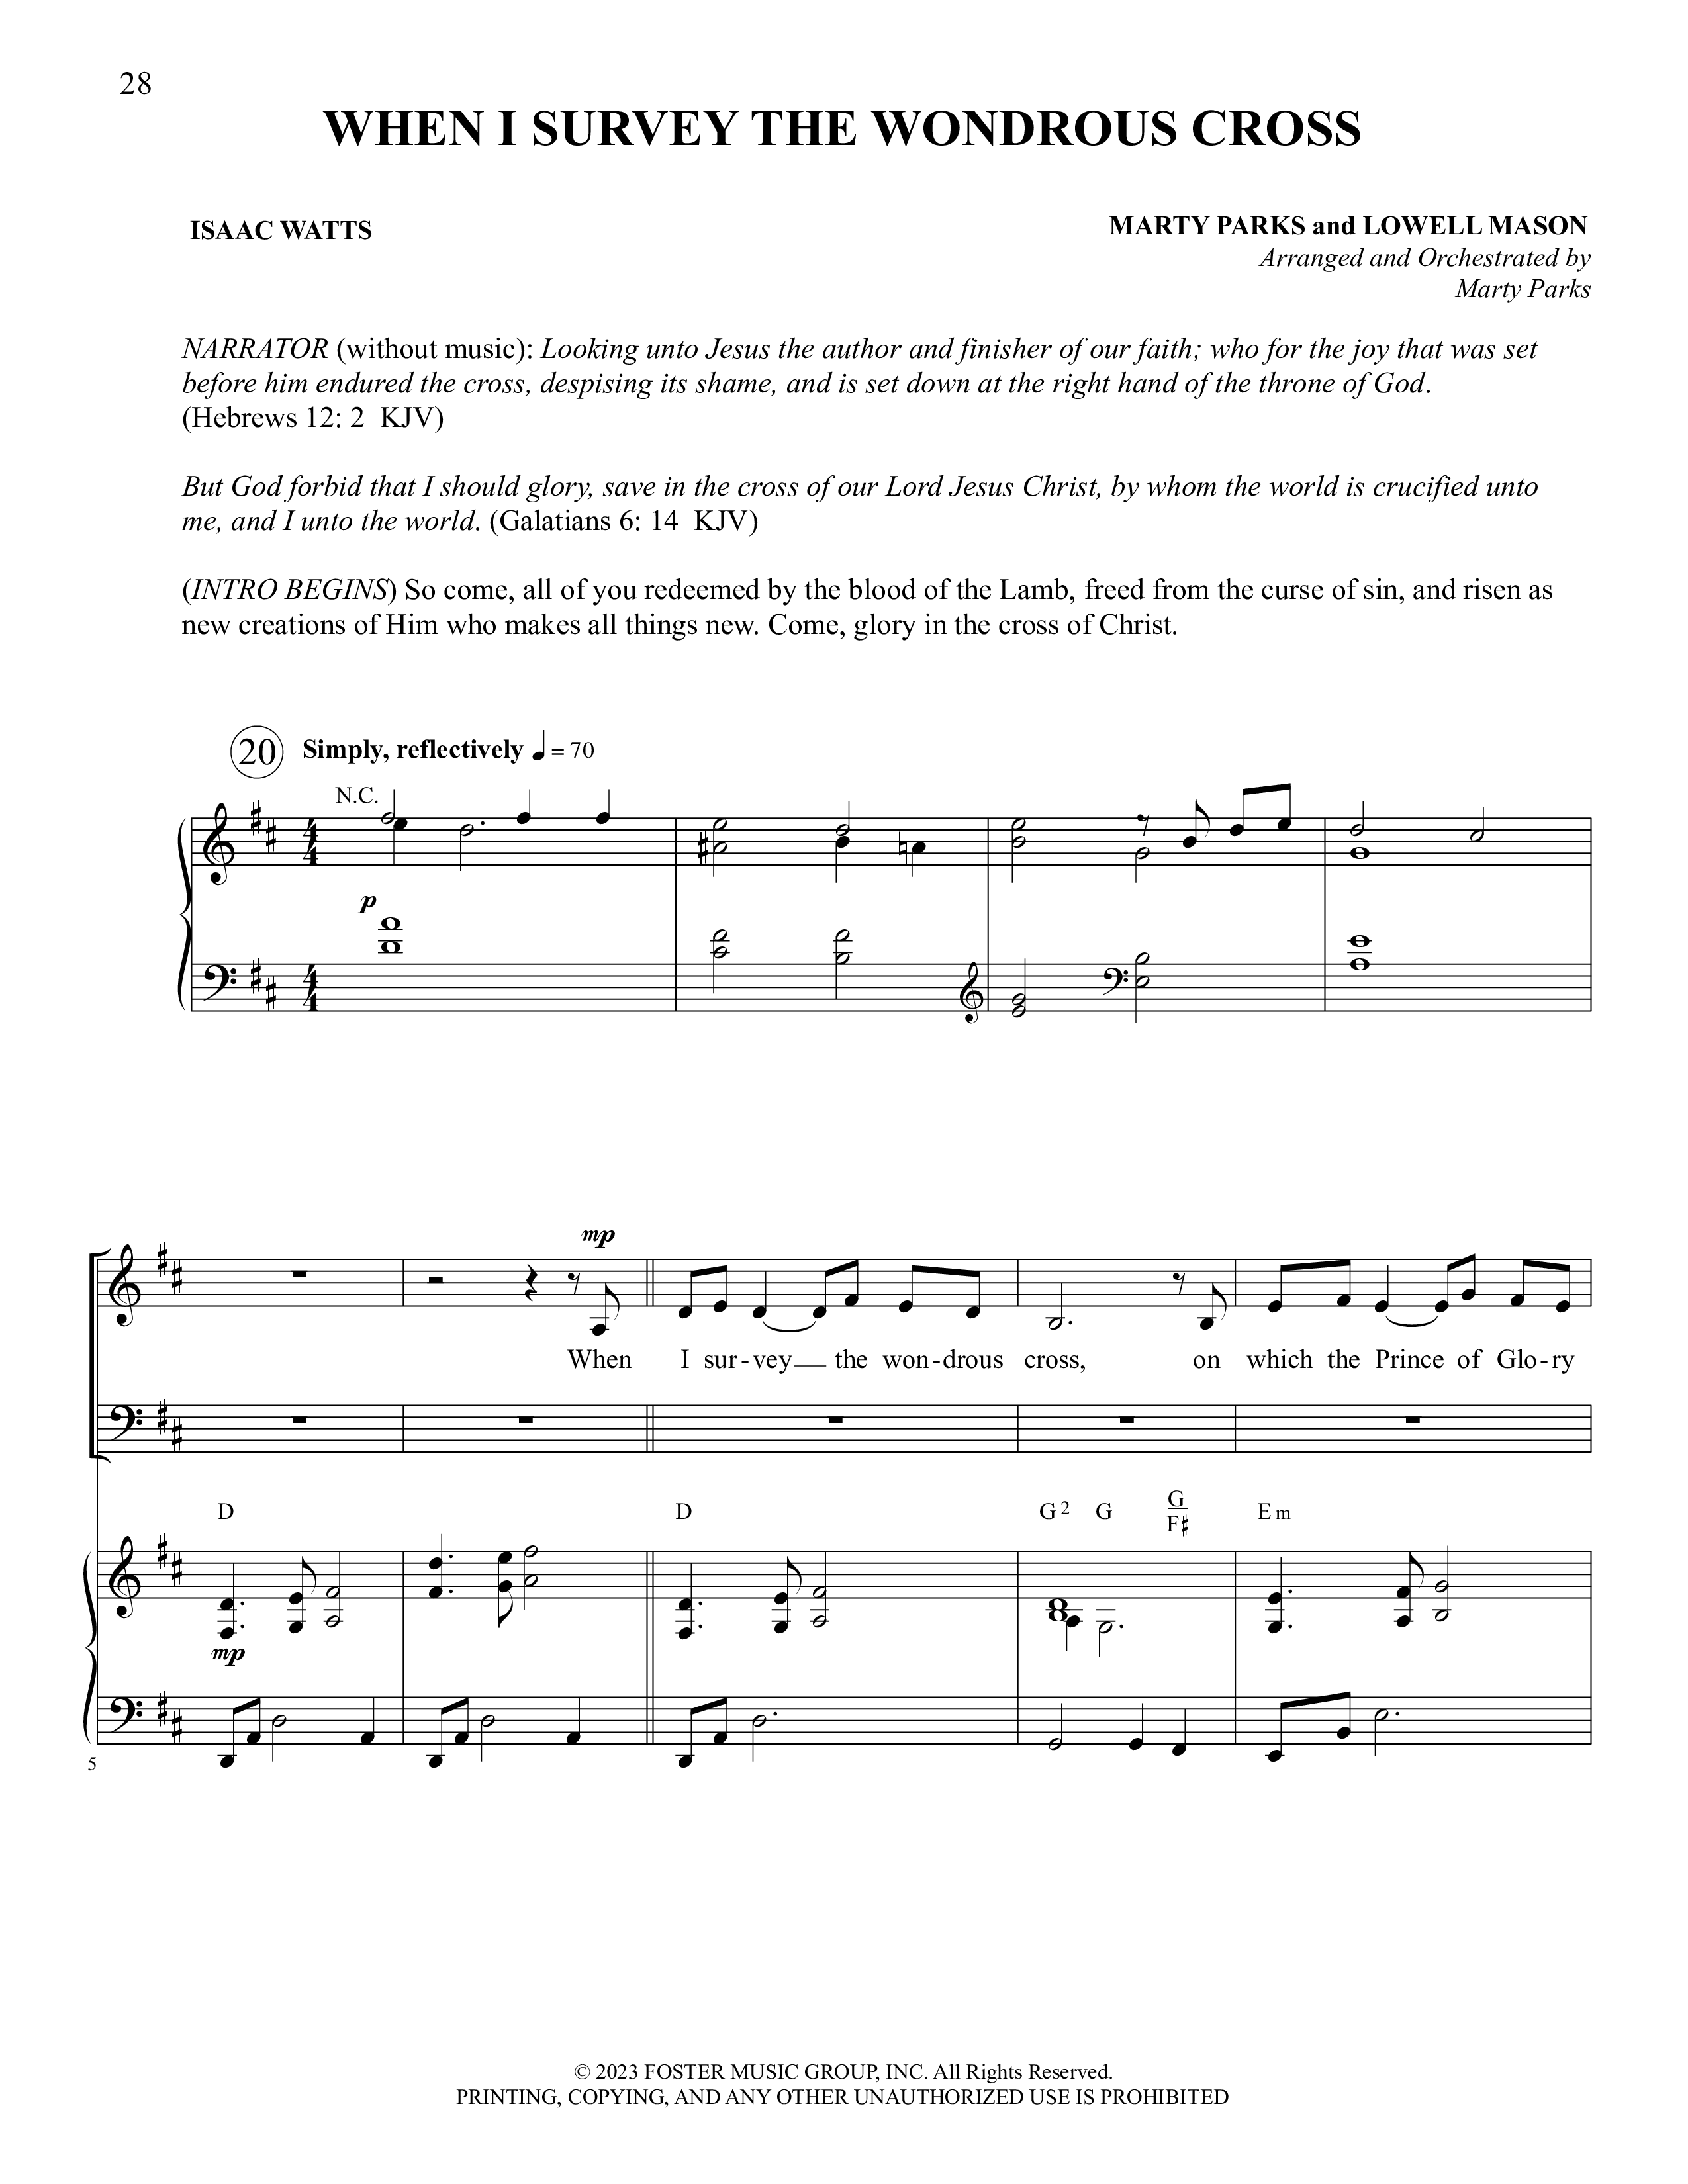 Glorious Cross (5 Song Choral Collection) Song 5 (Piano SATB) (Foster Music Group / Arr. Marty Parks)